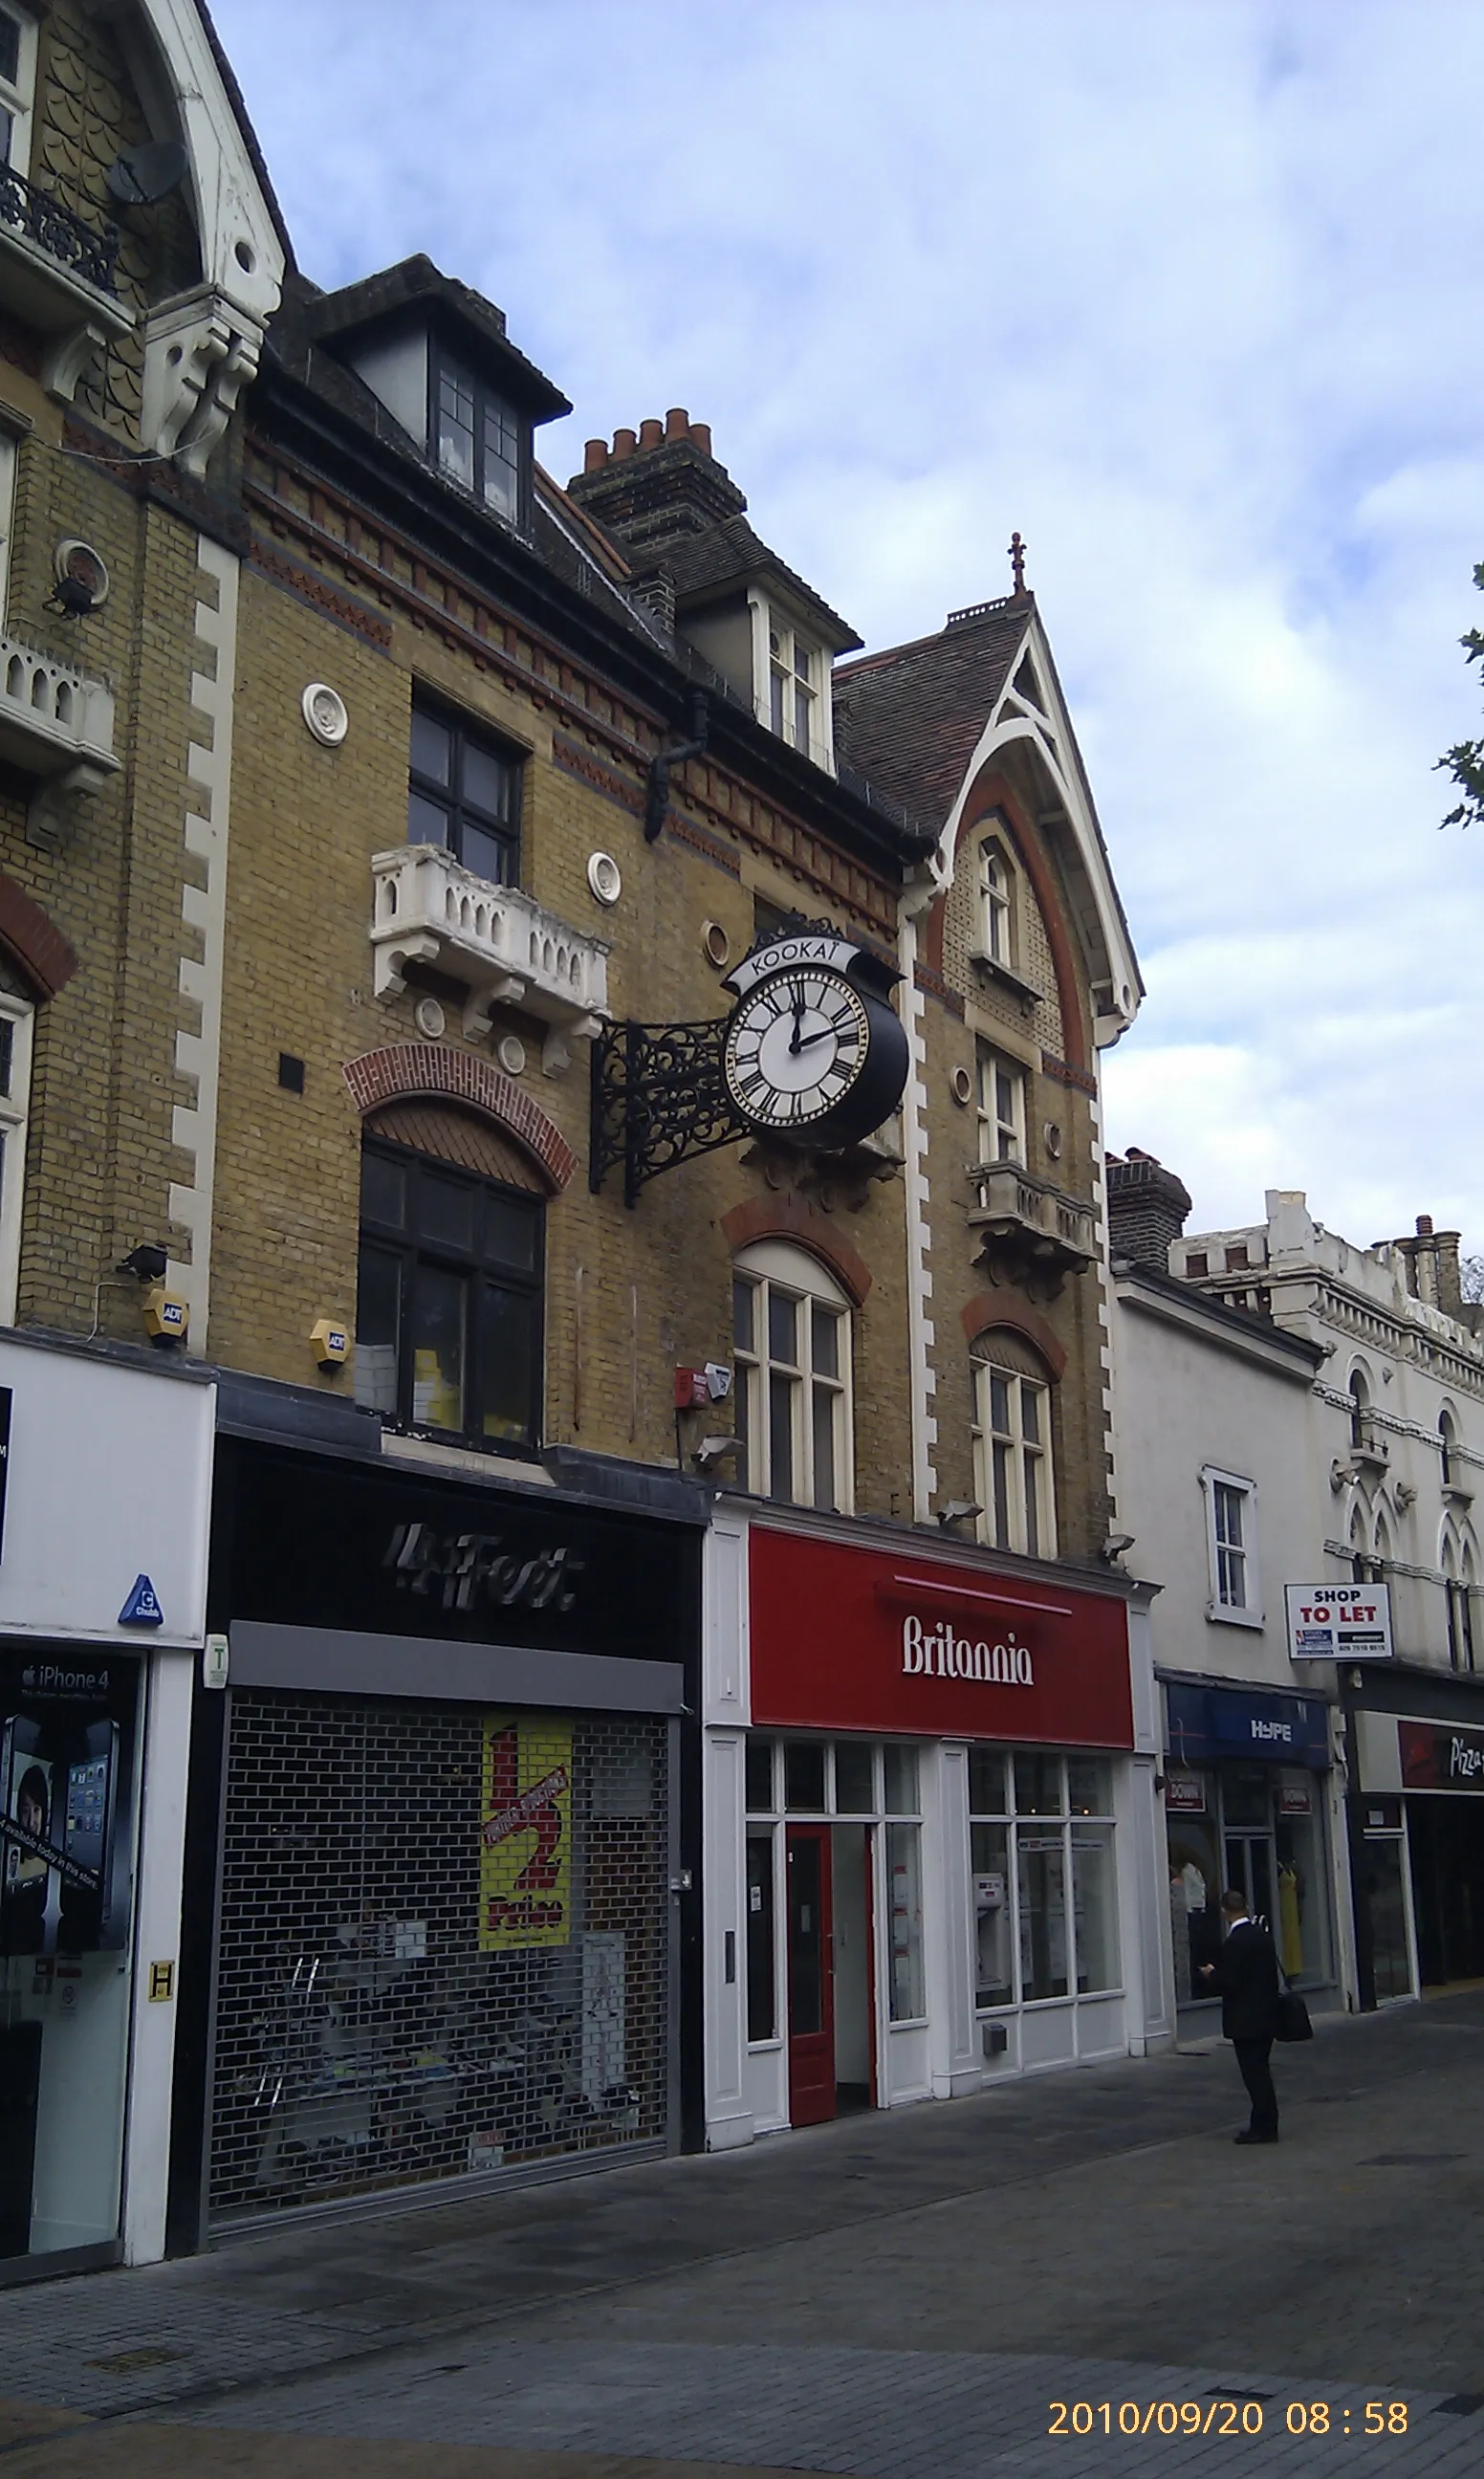 Photo showing: This clock does work but is not showing the correct time. I time-stamped the photo with the correct time. The location of the clock is in Croydon Town Centre on North End pedestrian walk, outside the Whitgift Centre.